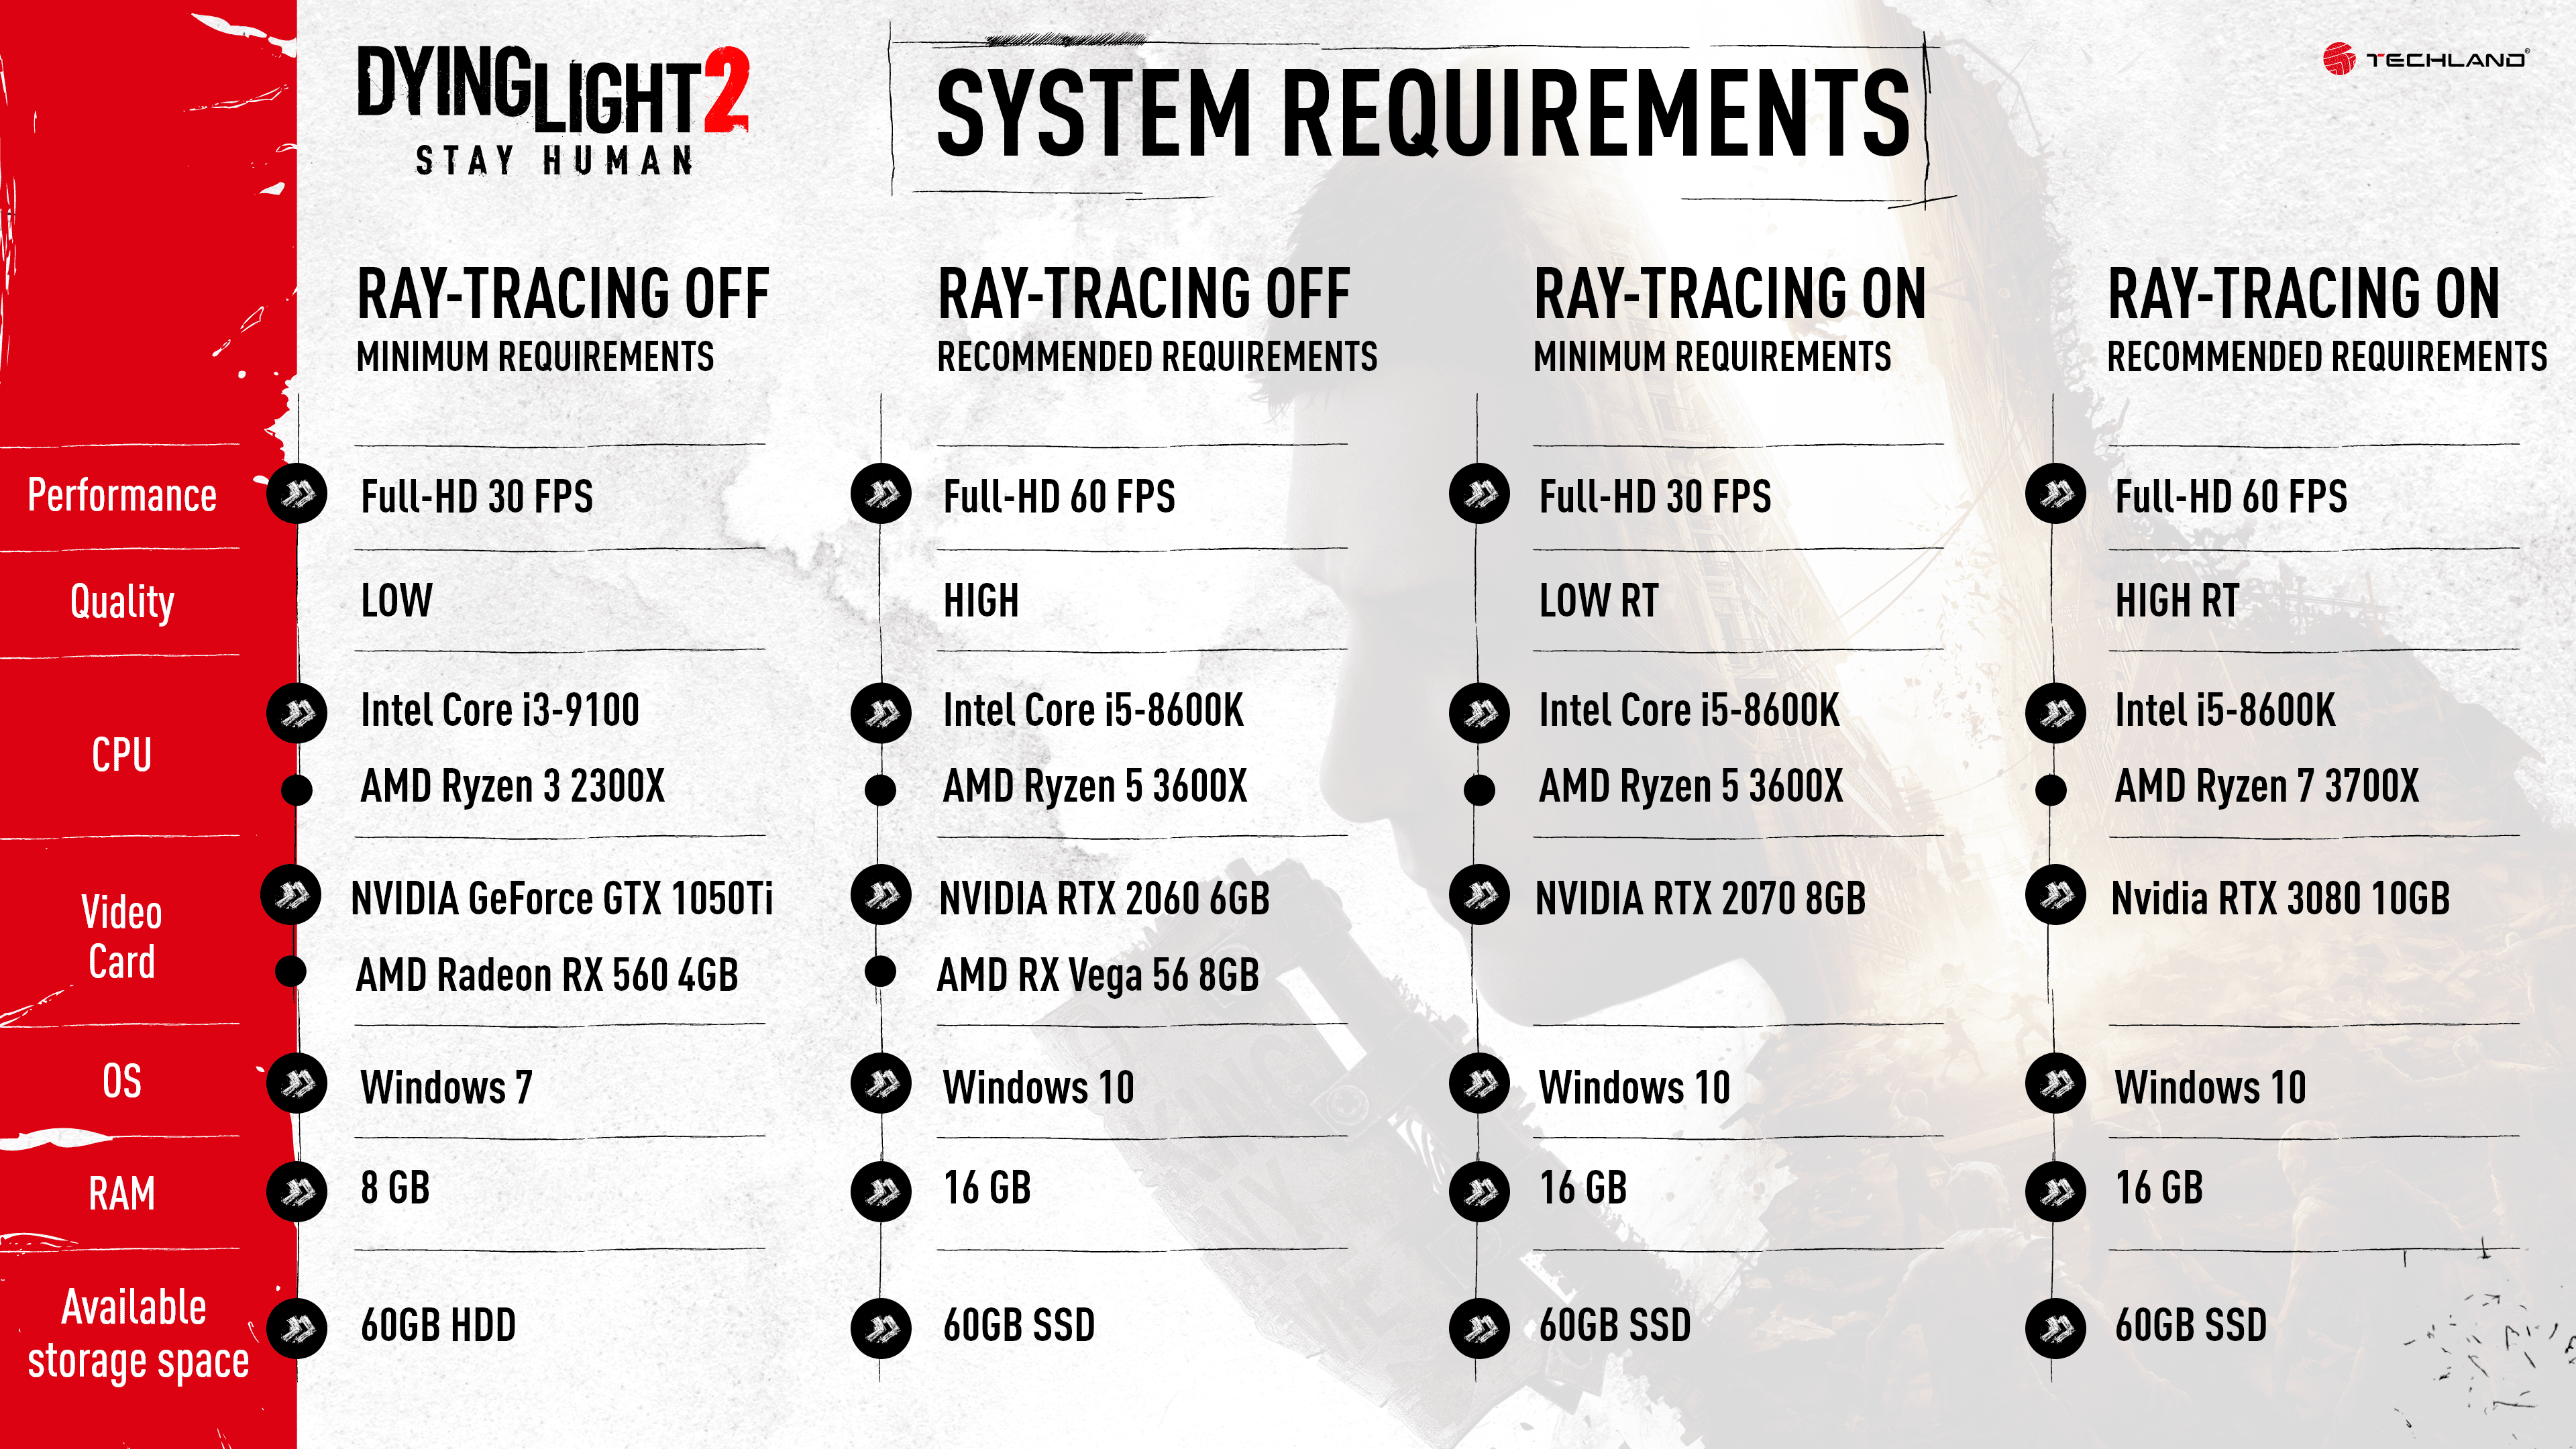 Steam client application is required in order to play dying light 2 фото 17